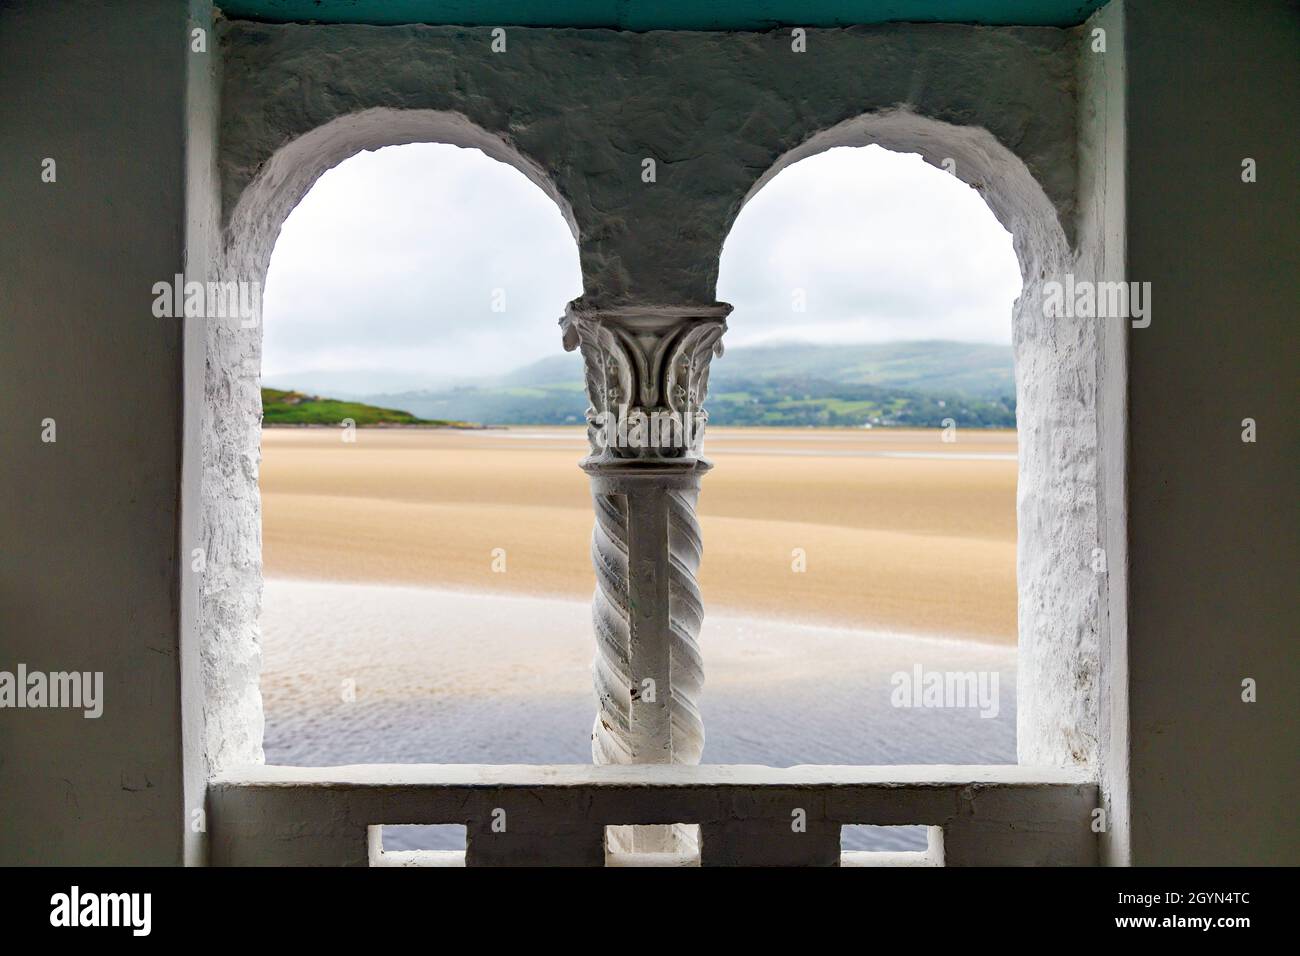 Windows looking out to the sea in Mediterranean style town Portmeirion, Snowdonia National Park, Wales, UK Stock Photo